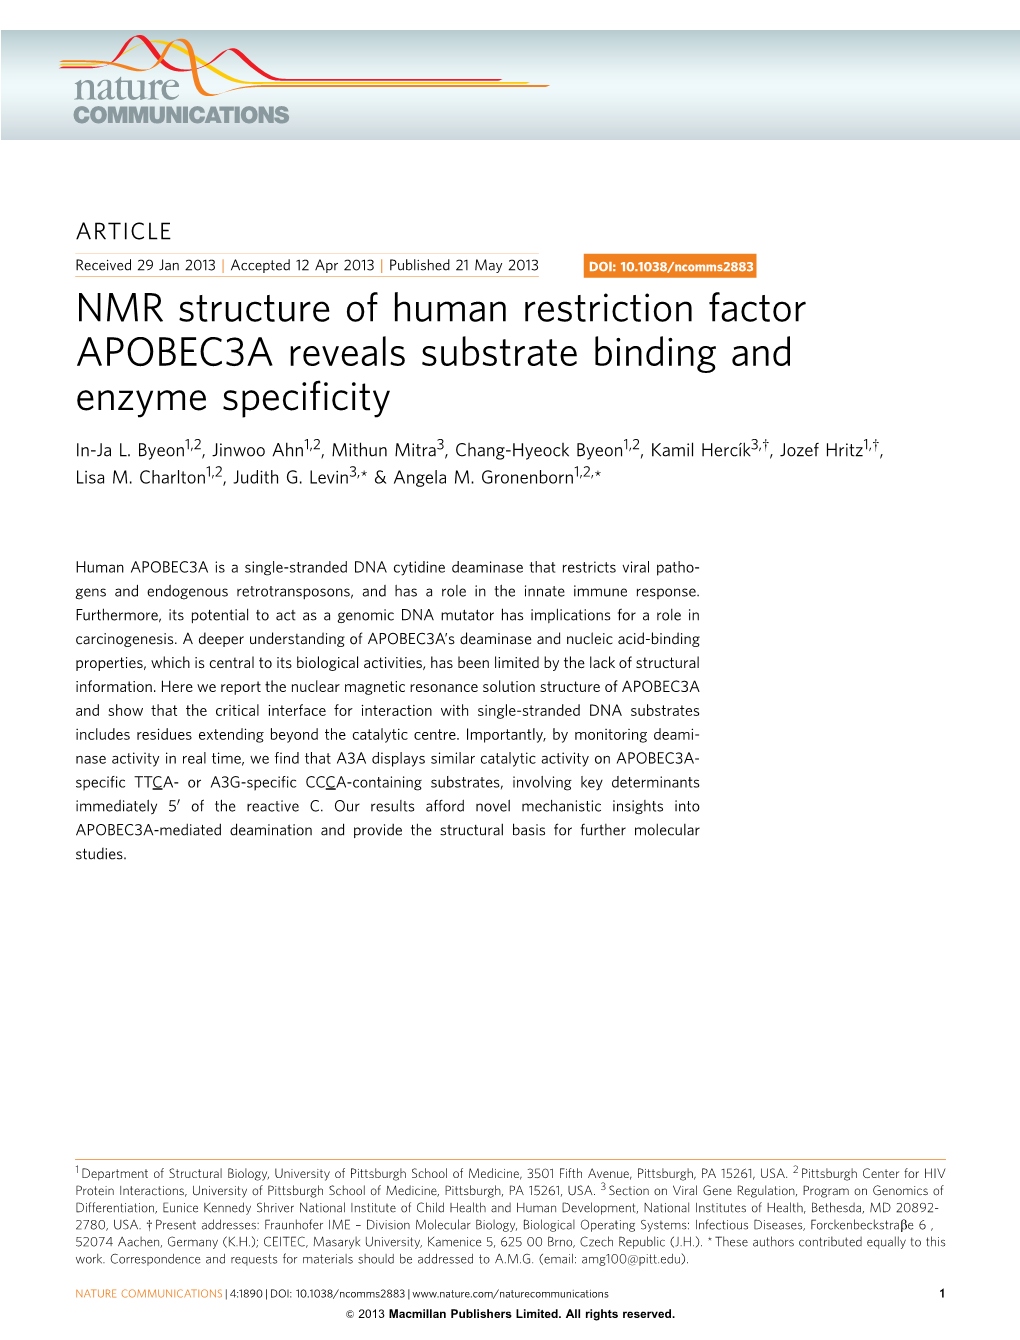 NMR Structure of Human Restriction Factor APOBEC3A Reveals Substrate Binding and Enzyme Speciﬁcity